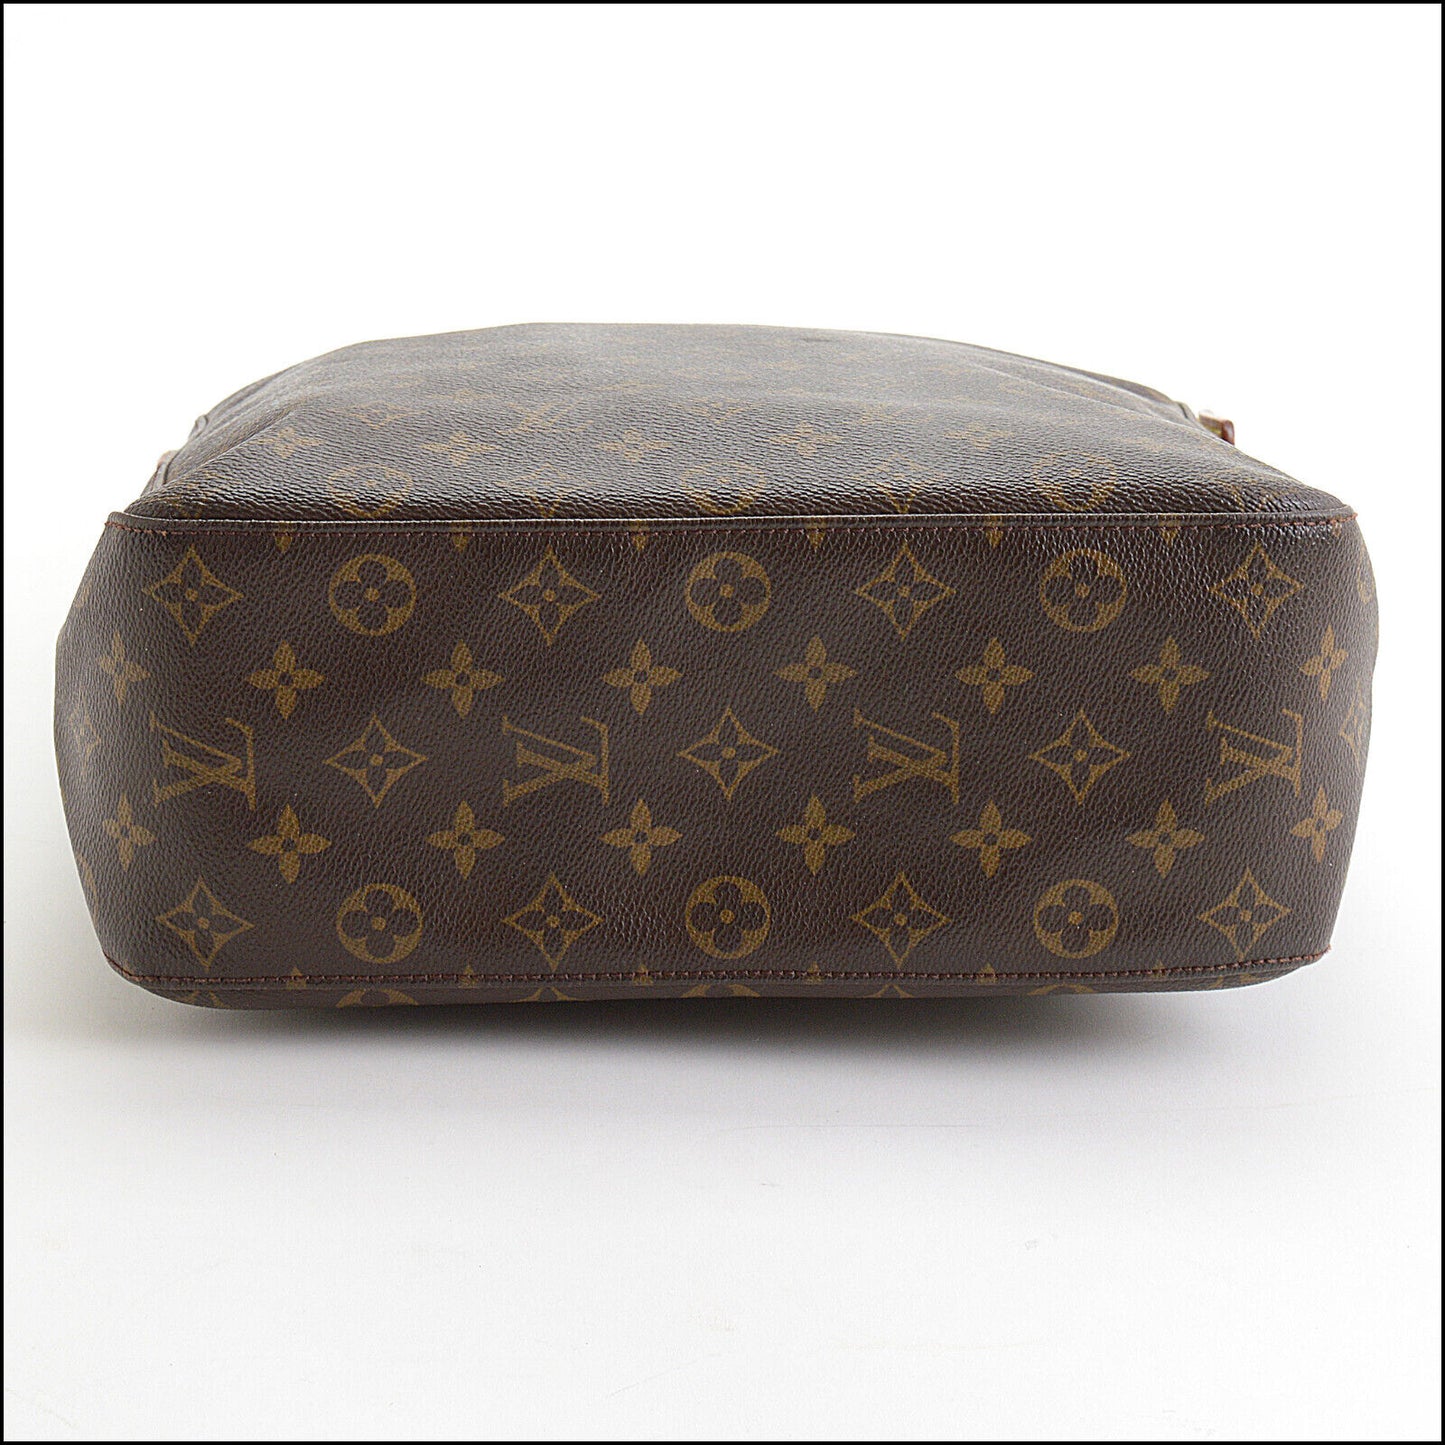 Louis Vuitton Monogram Canvas And Leather Looping GM Bag Louis